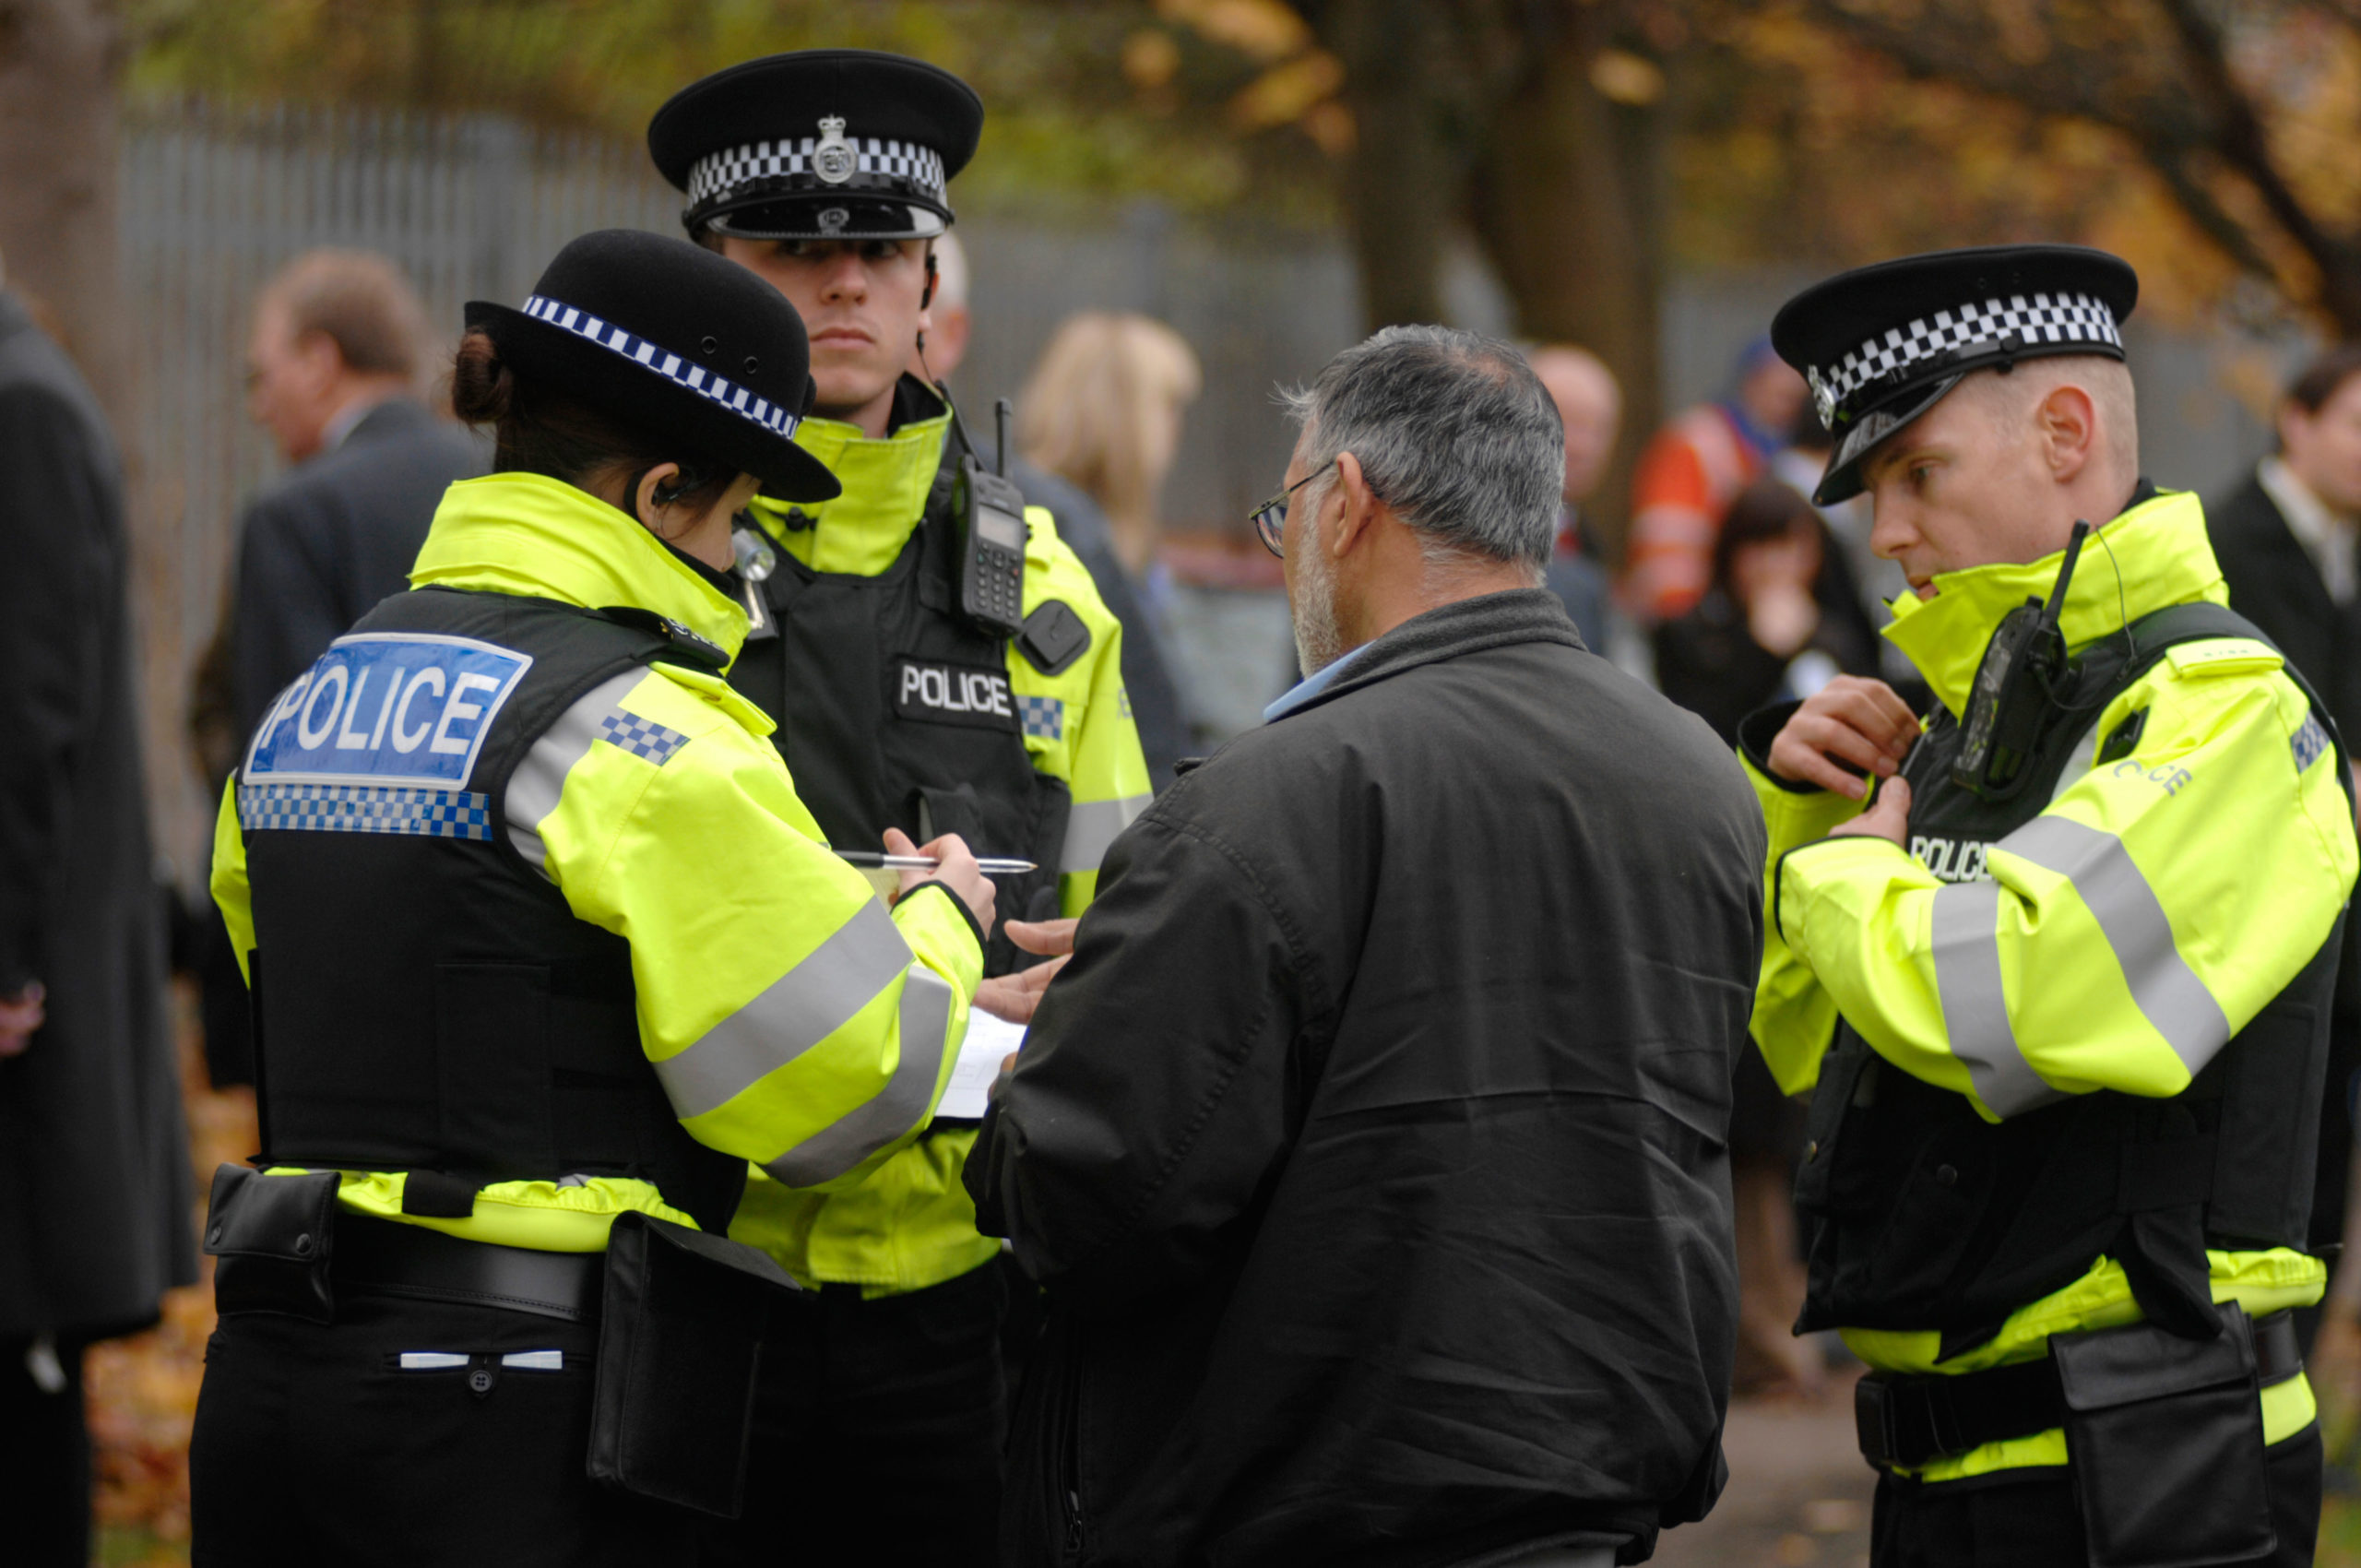 Police Scotland accused of racial profiling over counter-terror stops